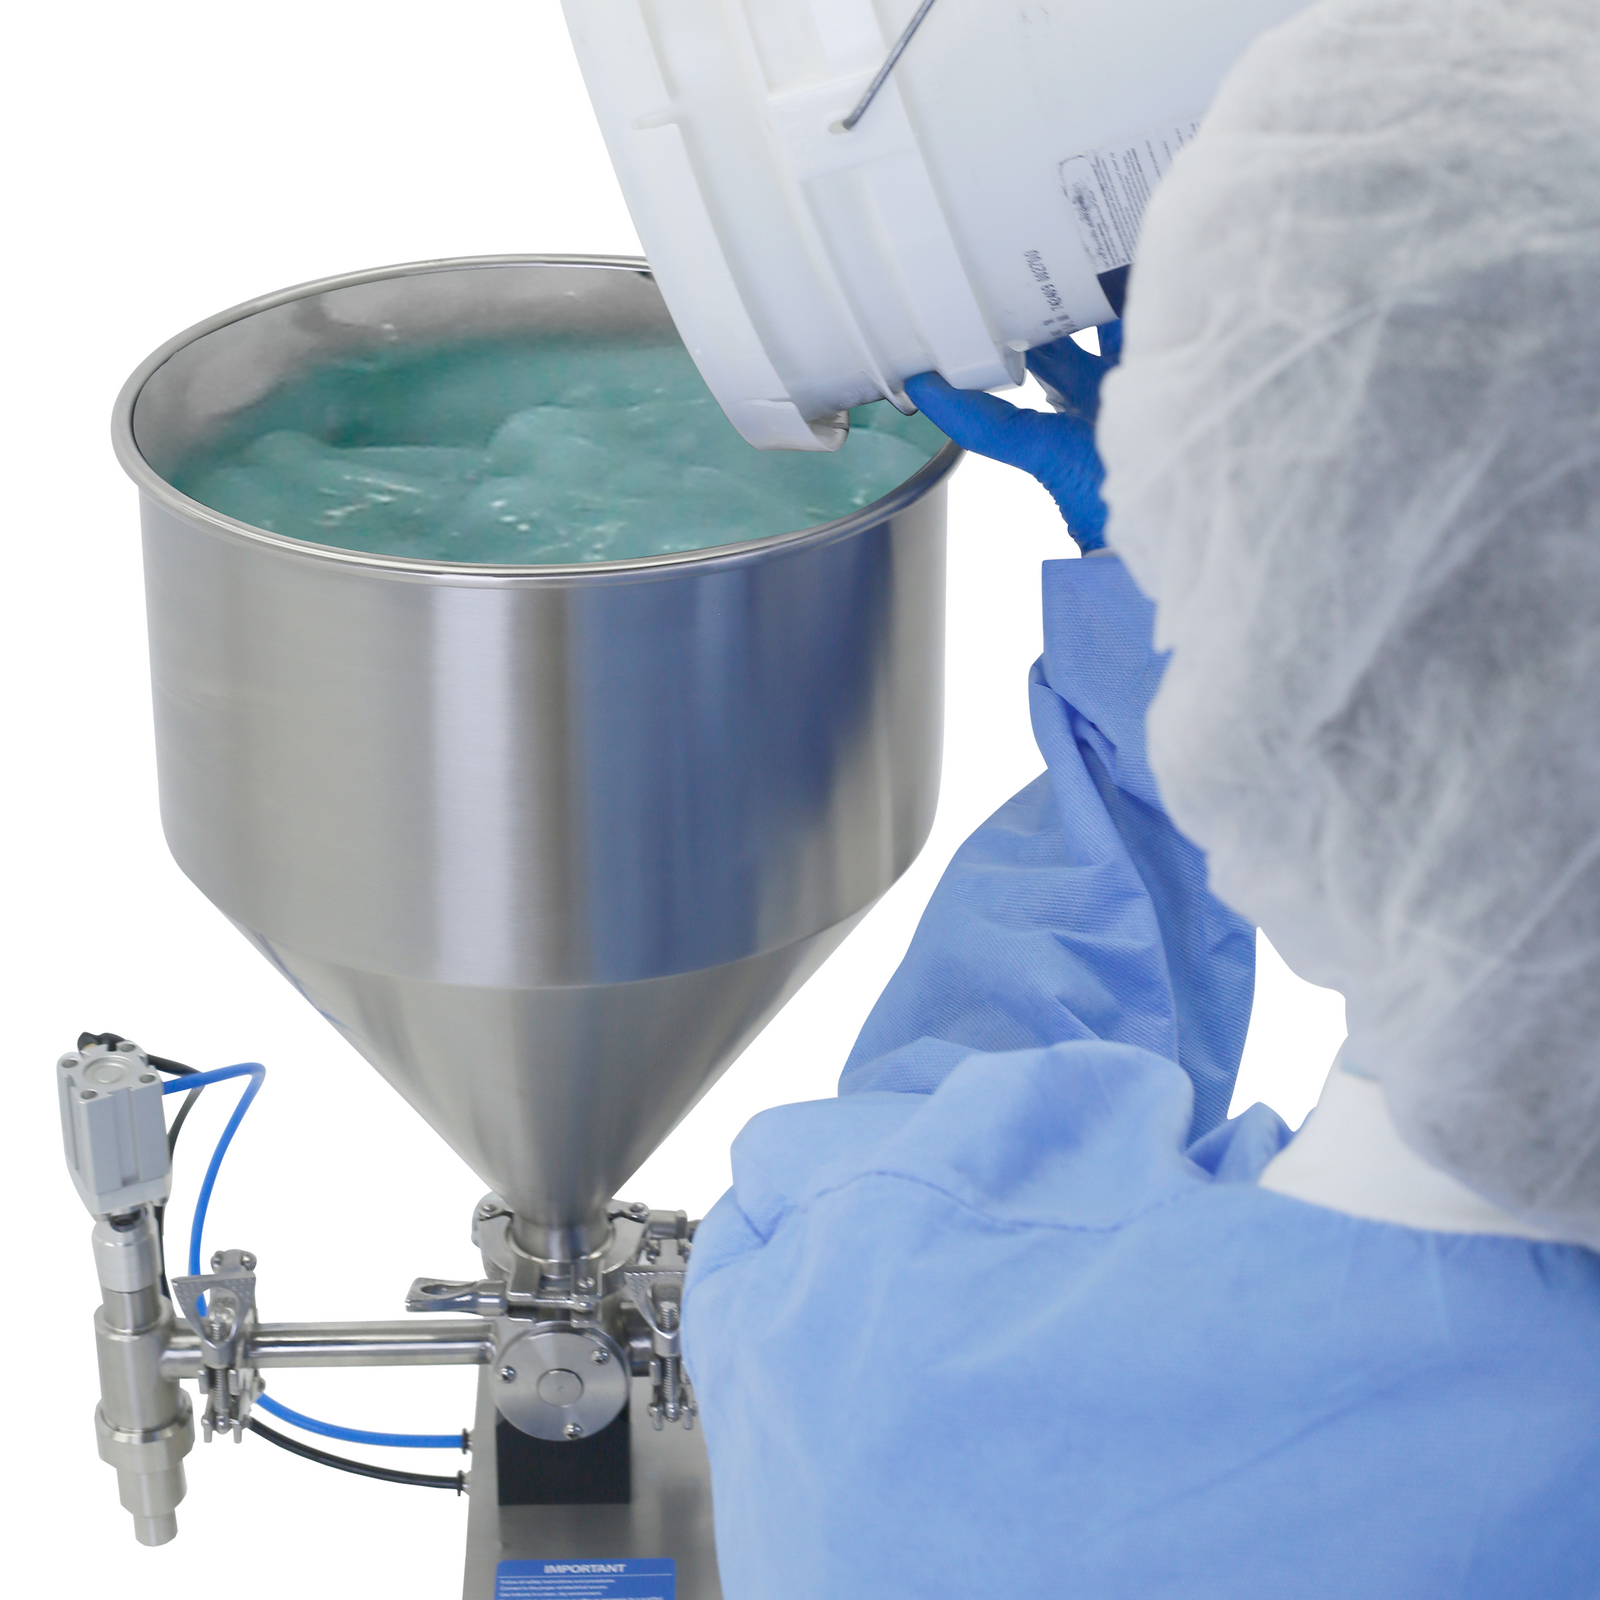 A worker wearing disposable clothing and gloves standing beside a Piston filler. He is dispensing a green gel into the hopper of a table top JORES TECHNOLOGIES® Piston filler for paste